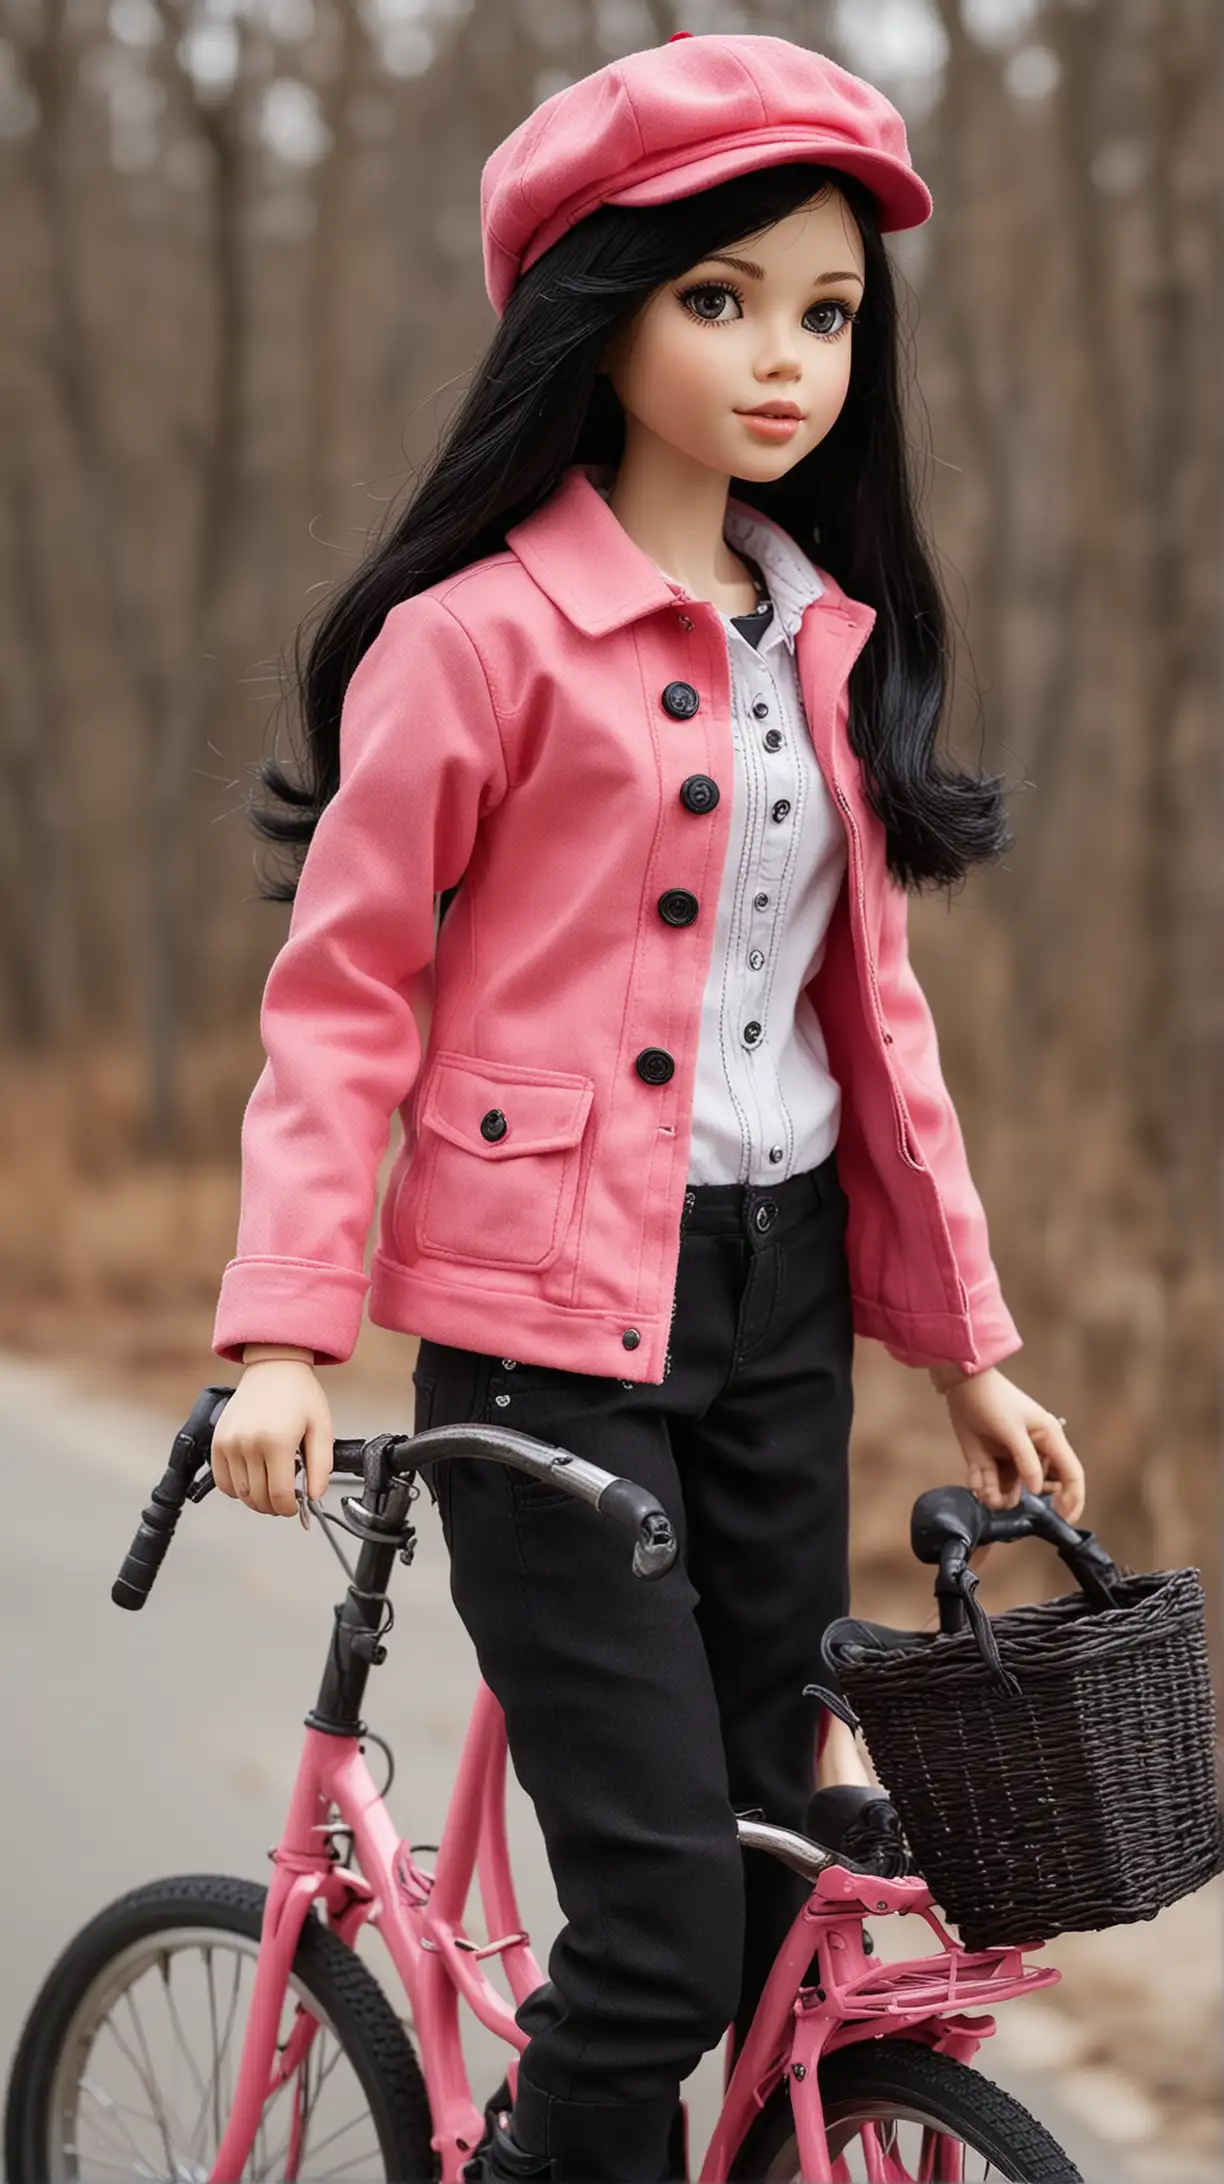 Stylish Teenage Doll Riding Bicycle in Red and Black Ensemble